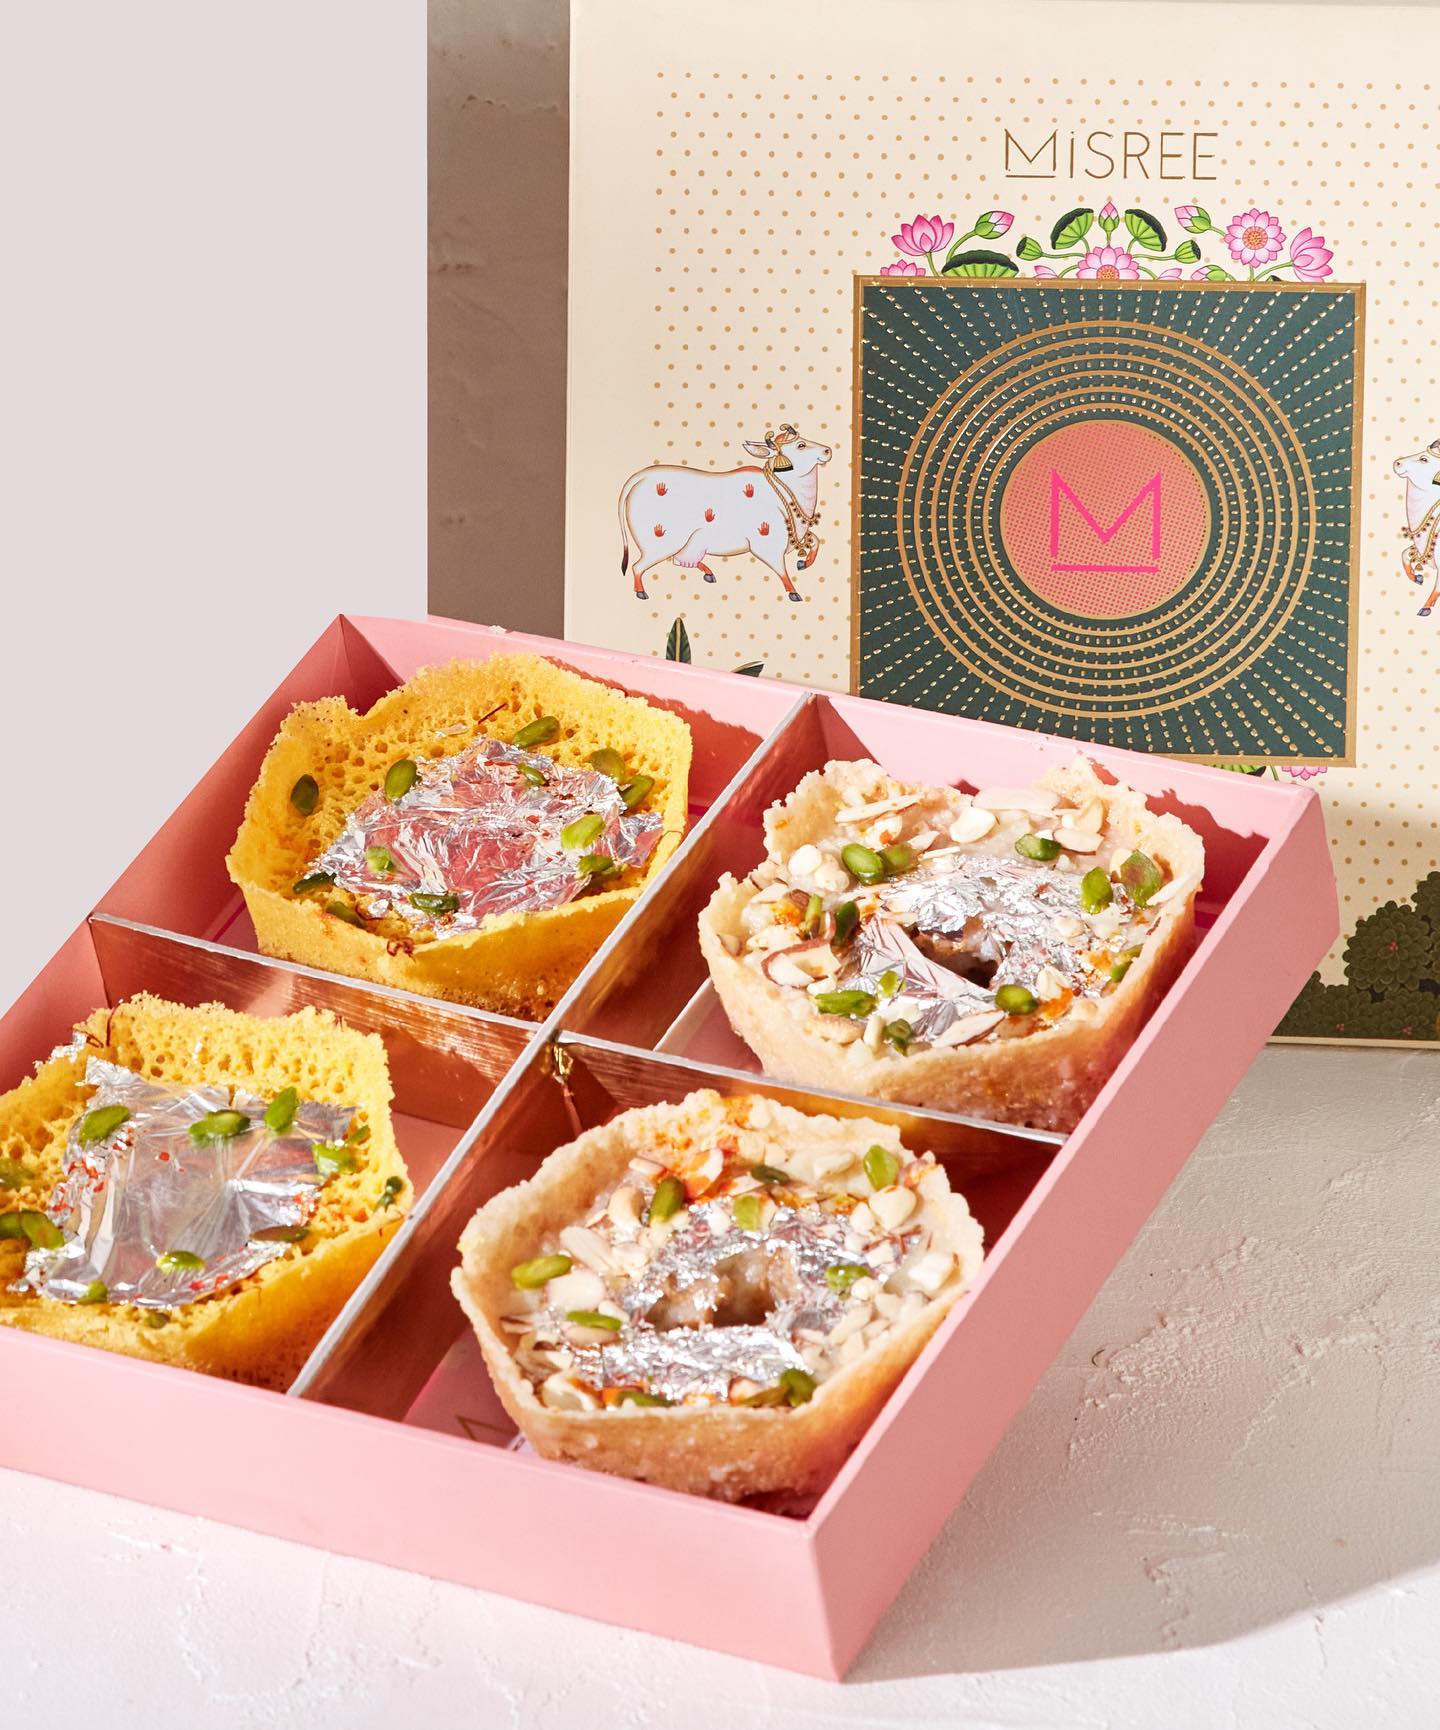 Unmissable Brands For Luxury Decor, Festive Giftings & Sweets Collection This Diwali